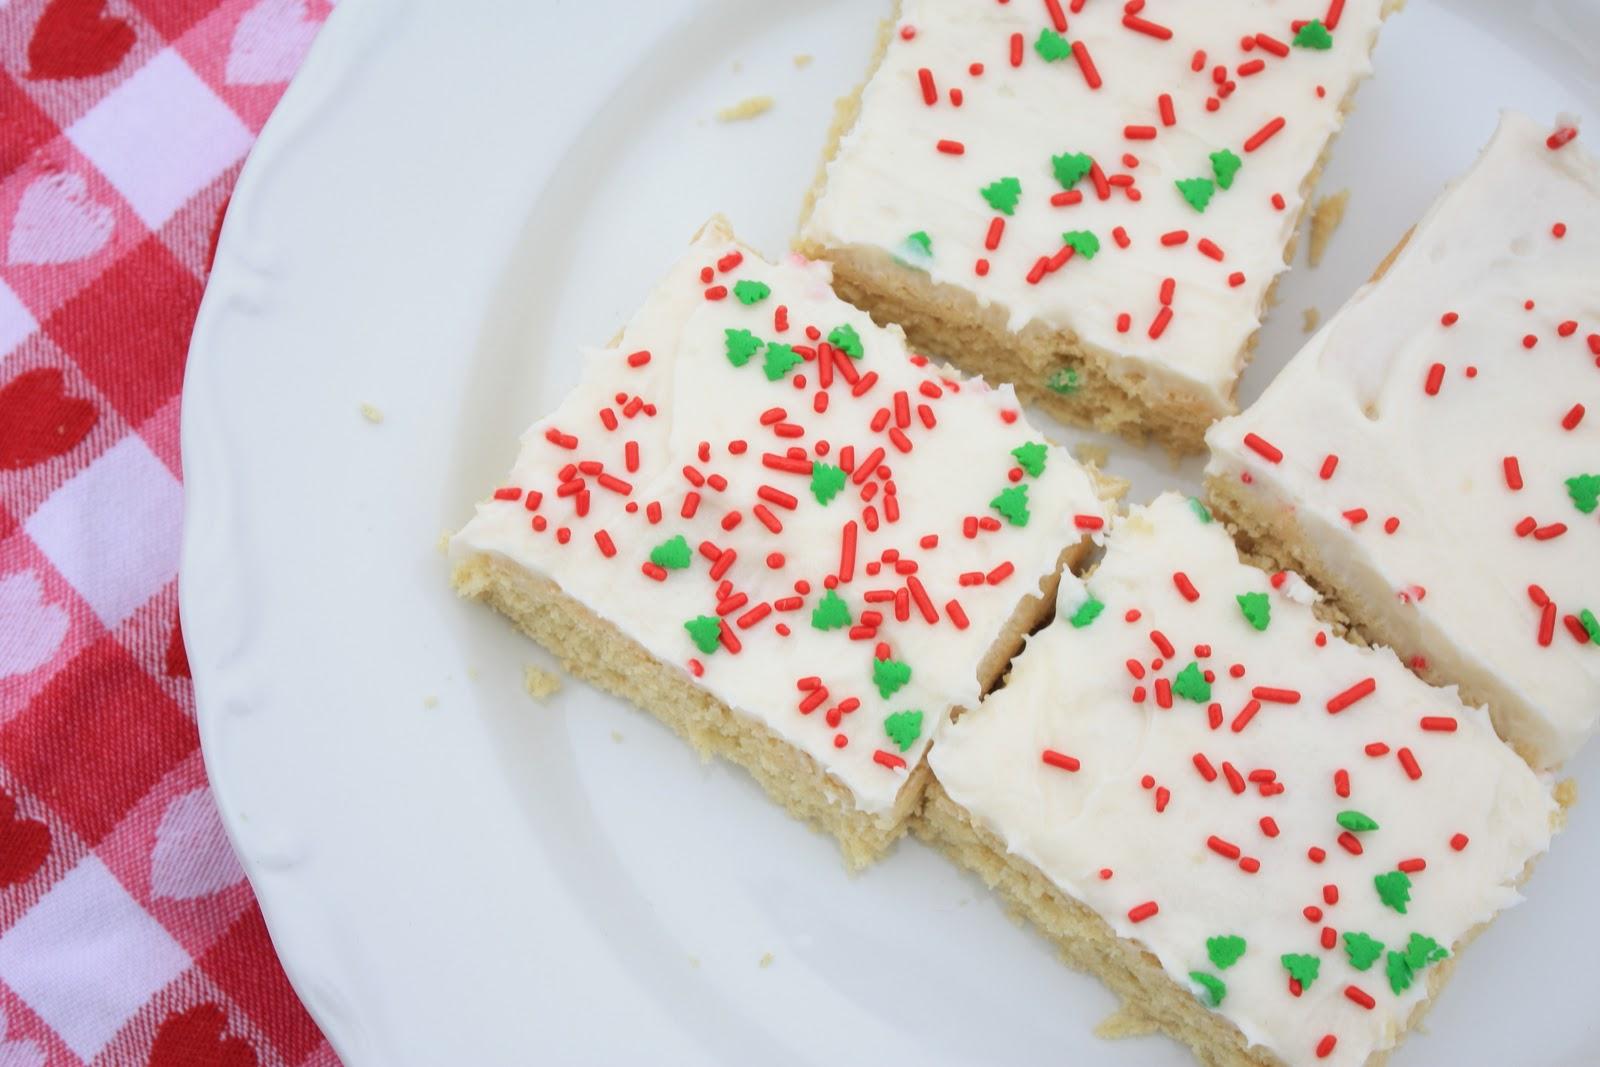 These sugar cookie bars are